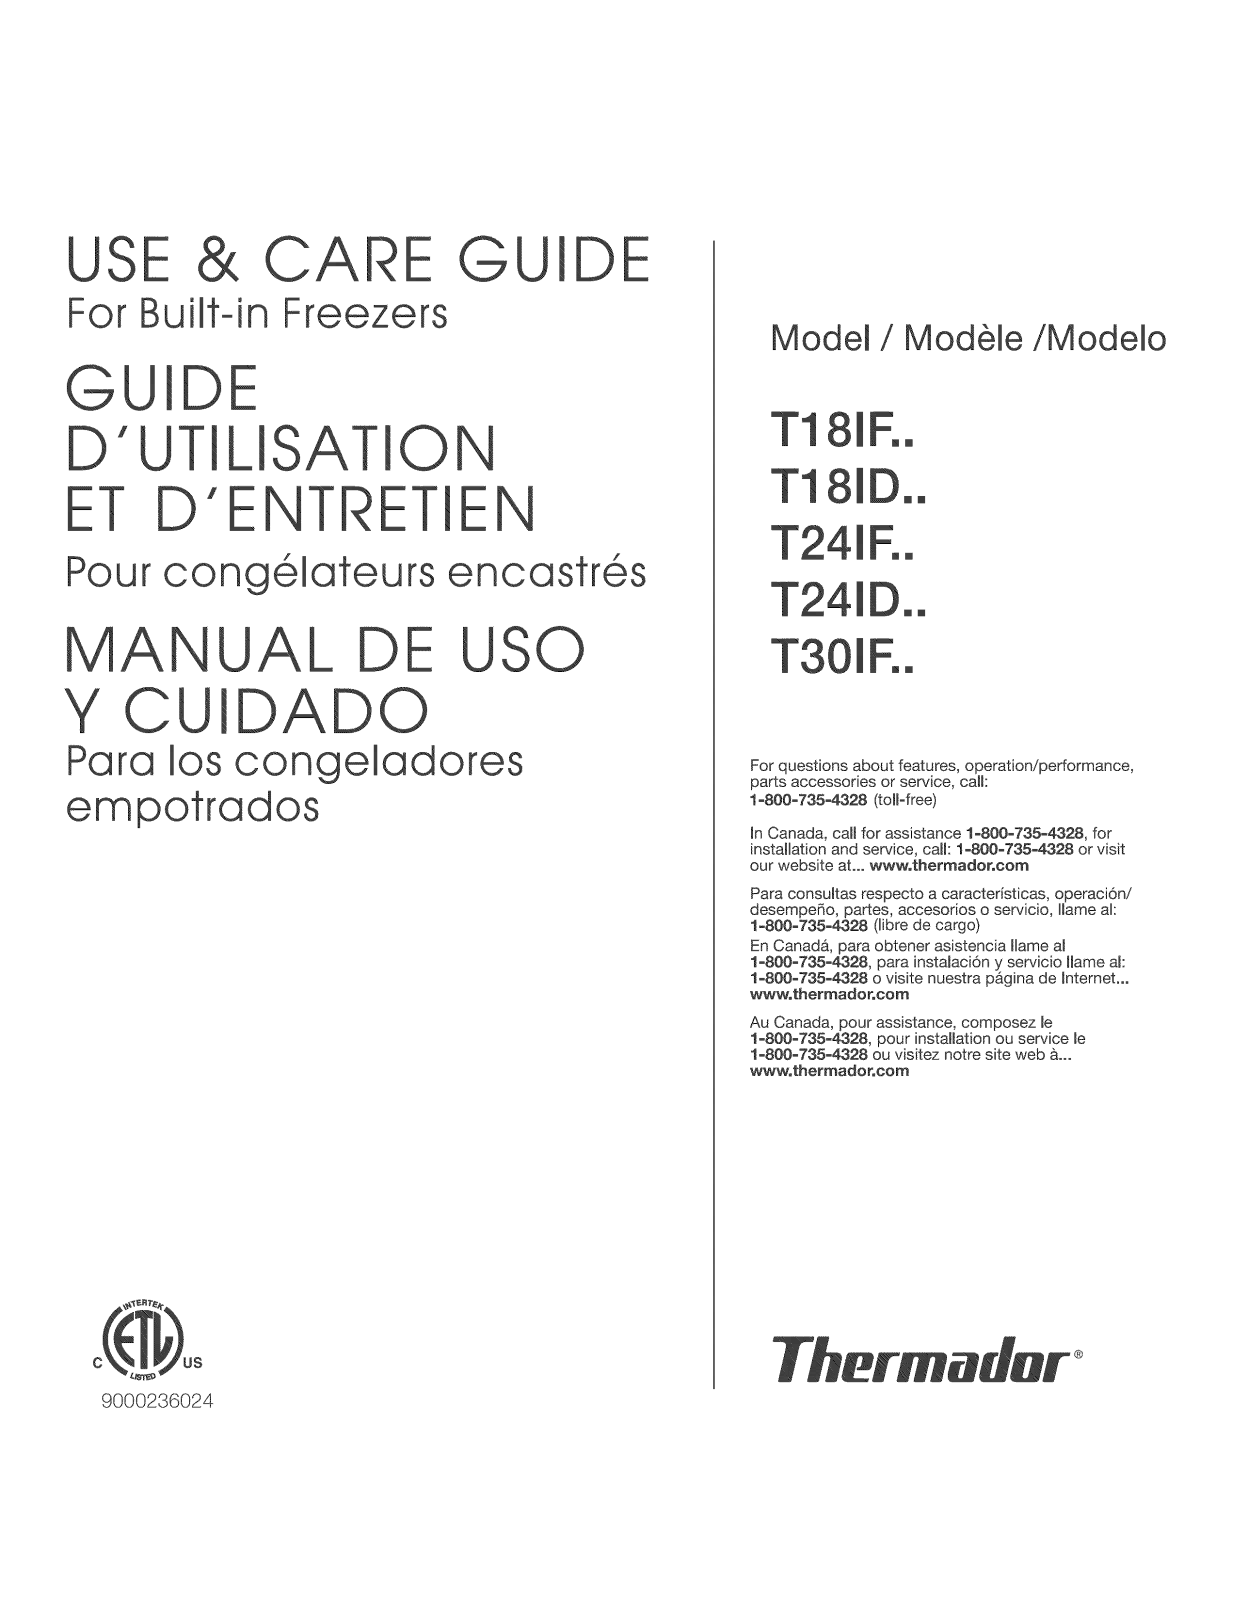 Thermador T24IF70NSP/47, T24IF70NSP/99, T24IF70NSP/46, T24IF70NSP/45, T24IF70NSP/43 Owner’s Manual